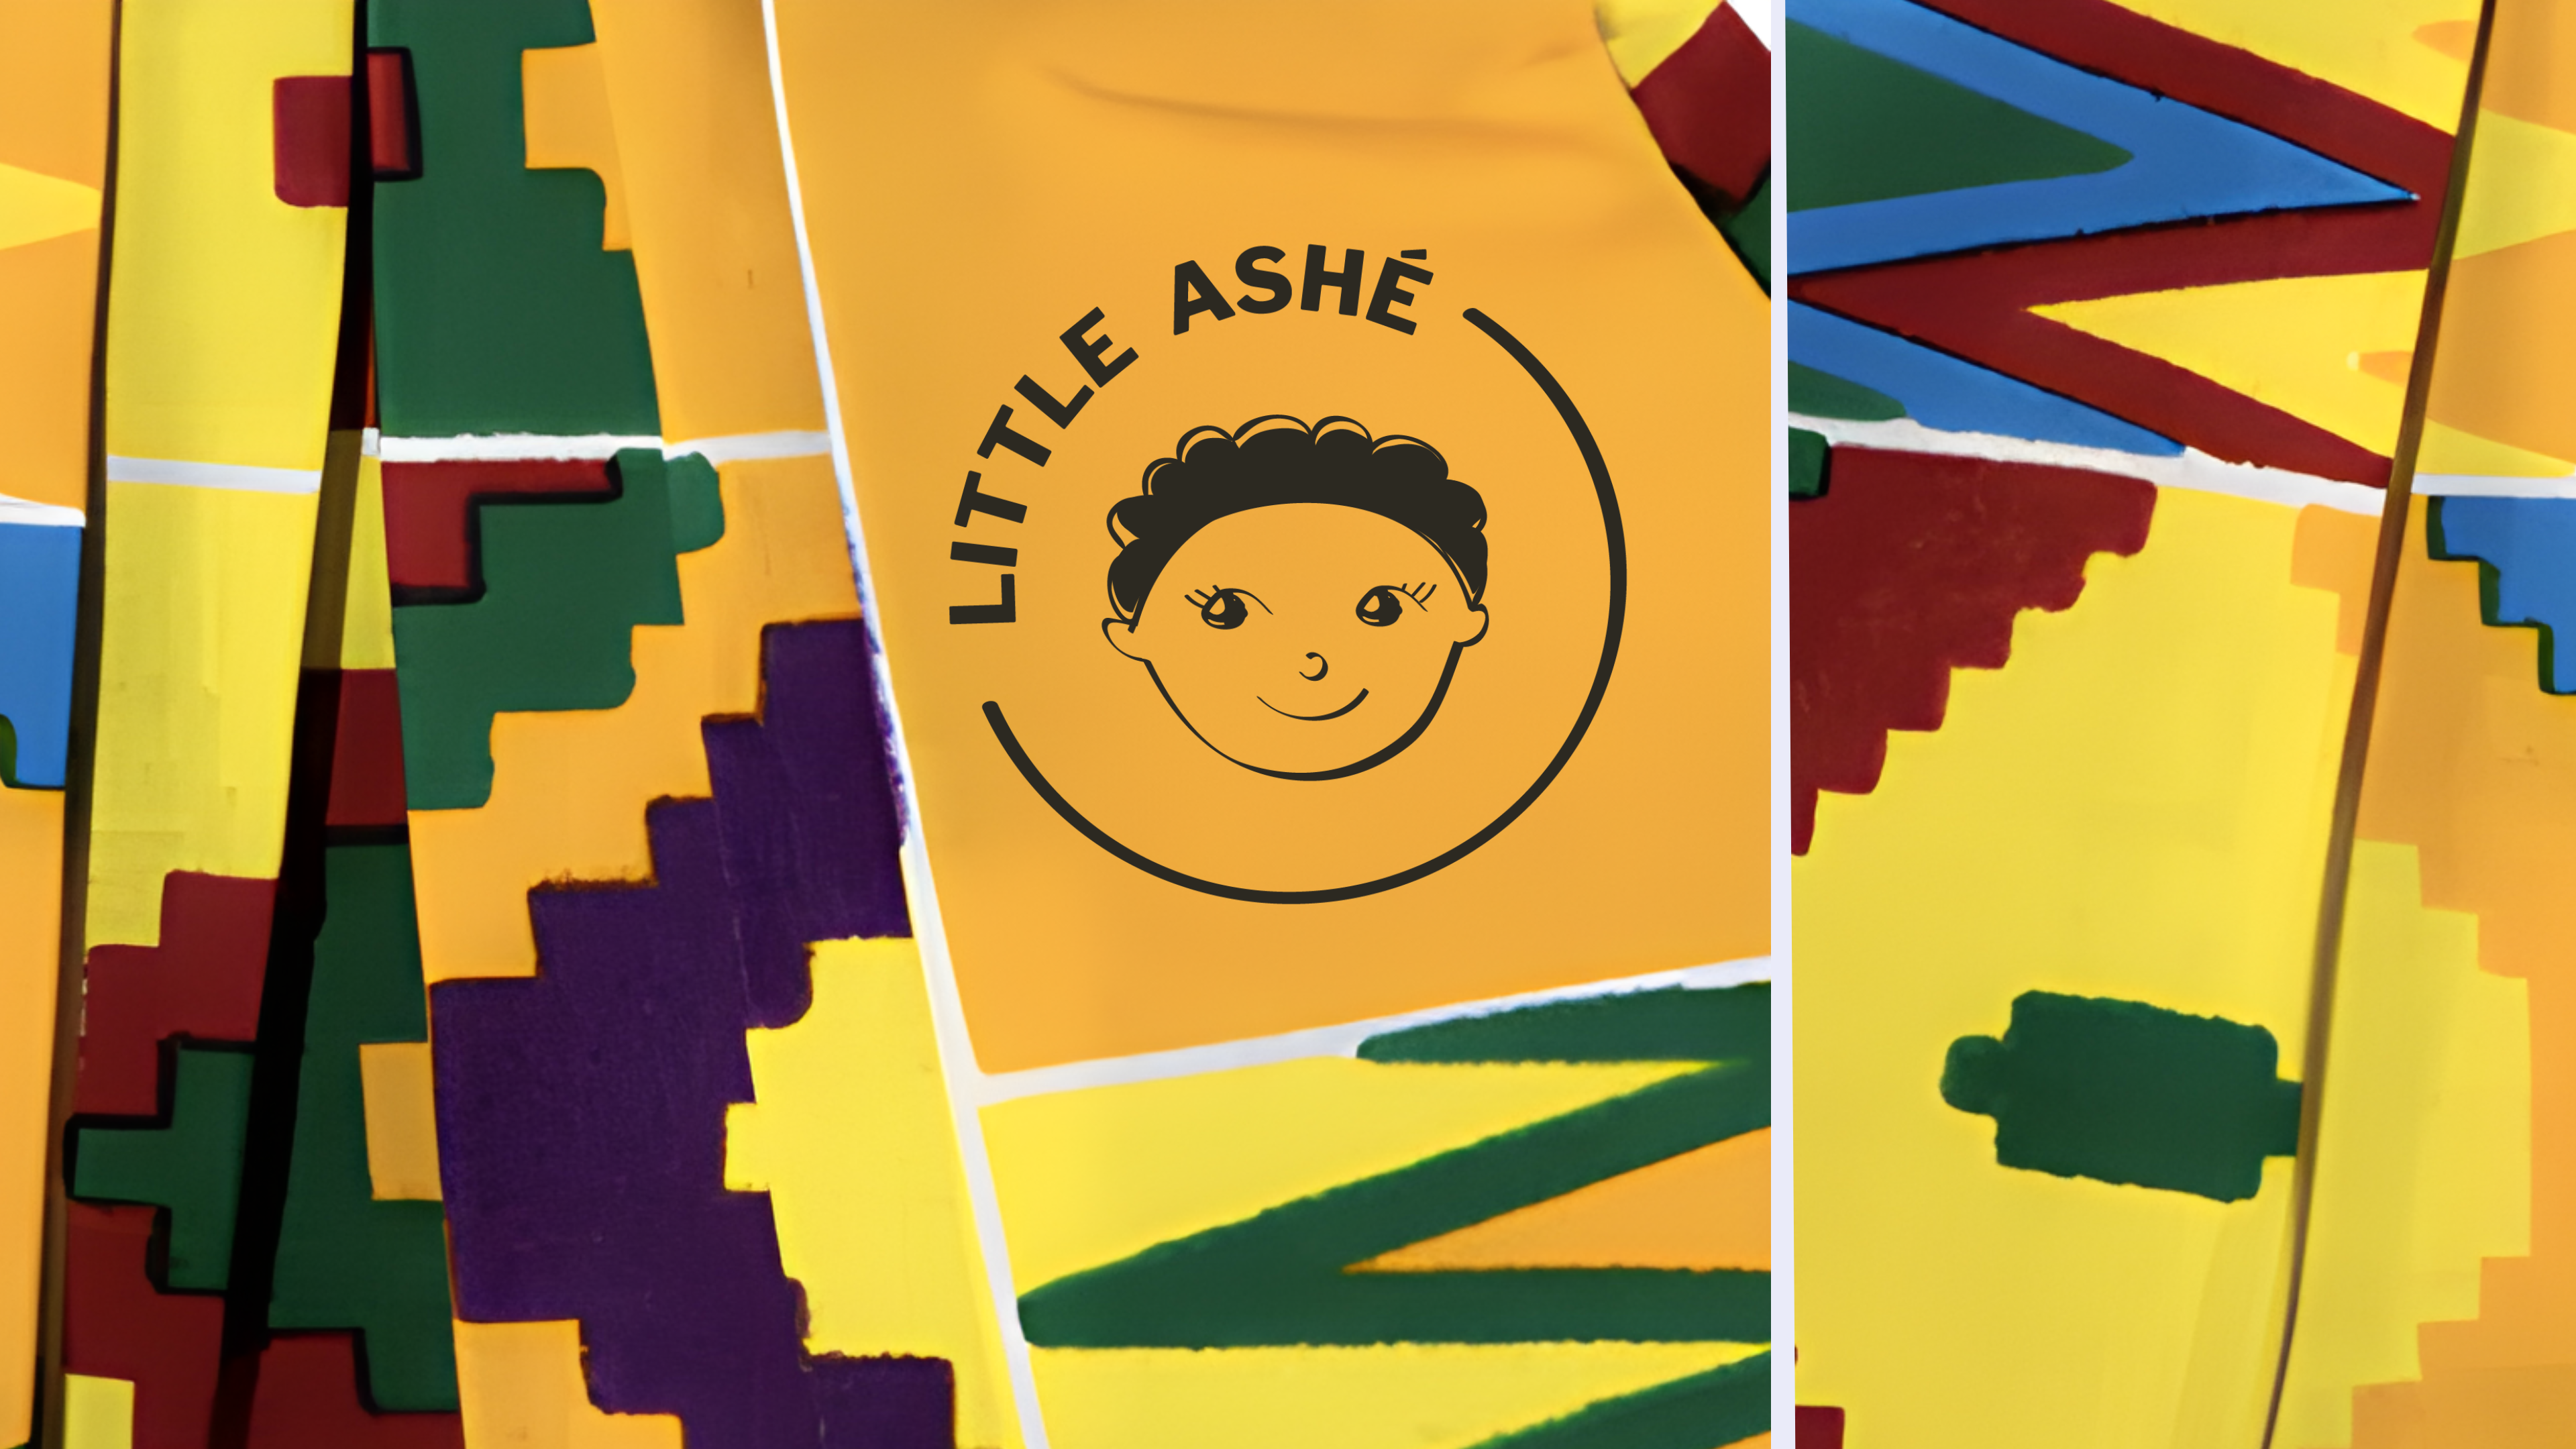 A vibrant fabric pattern with the LITTLE ASHÉ logo on top